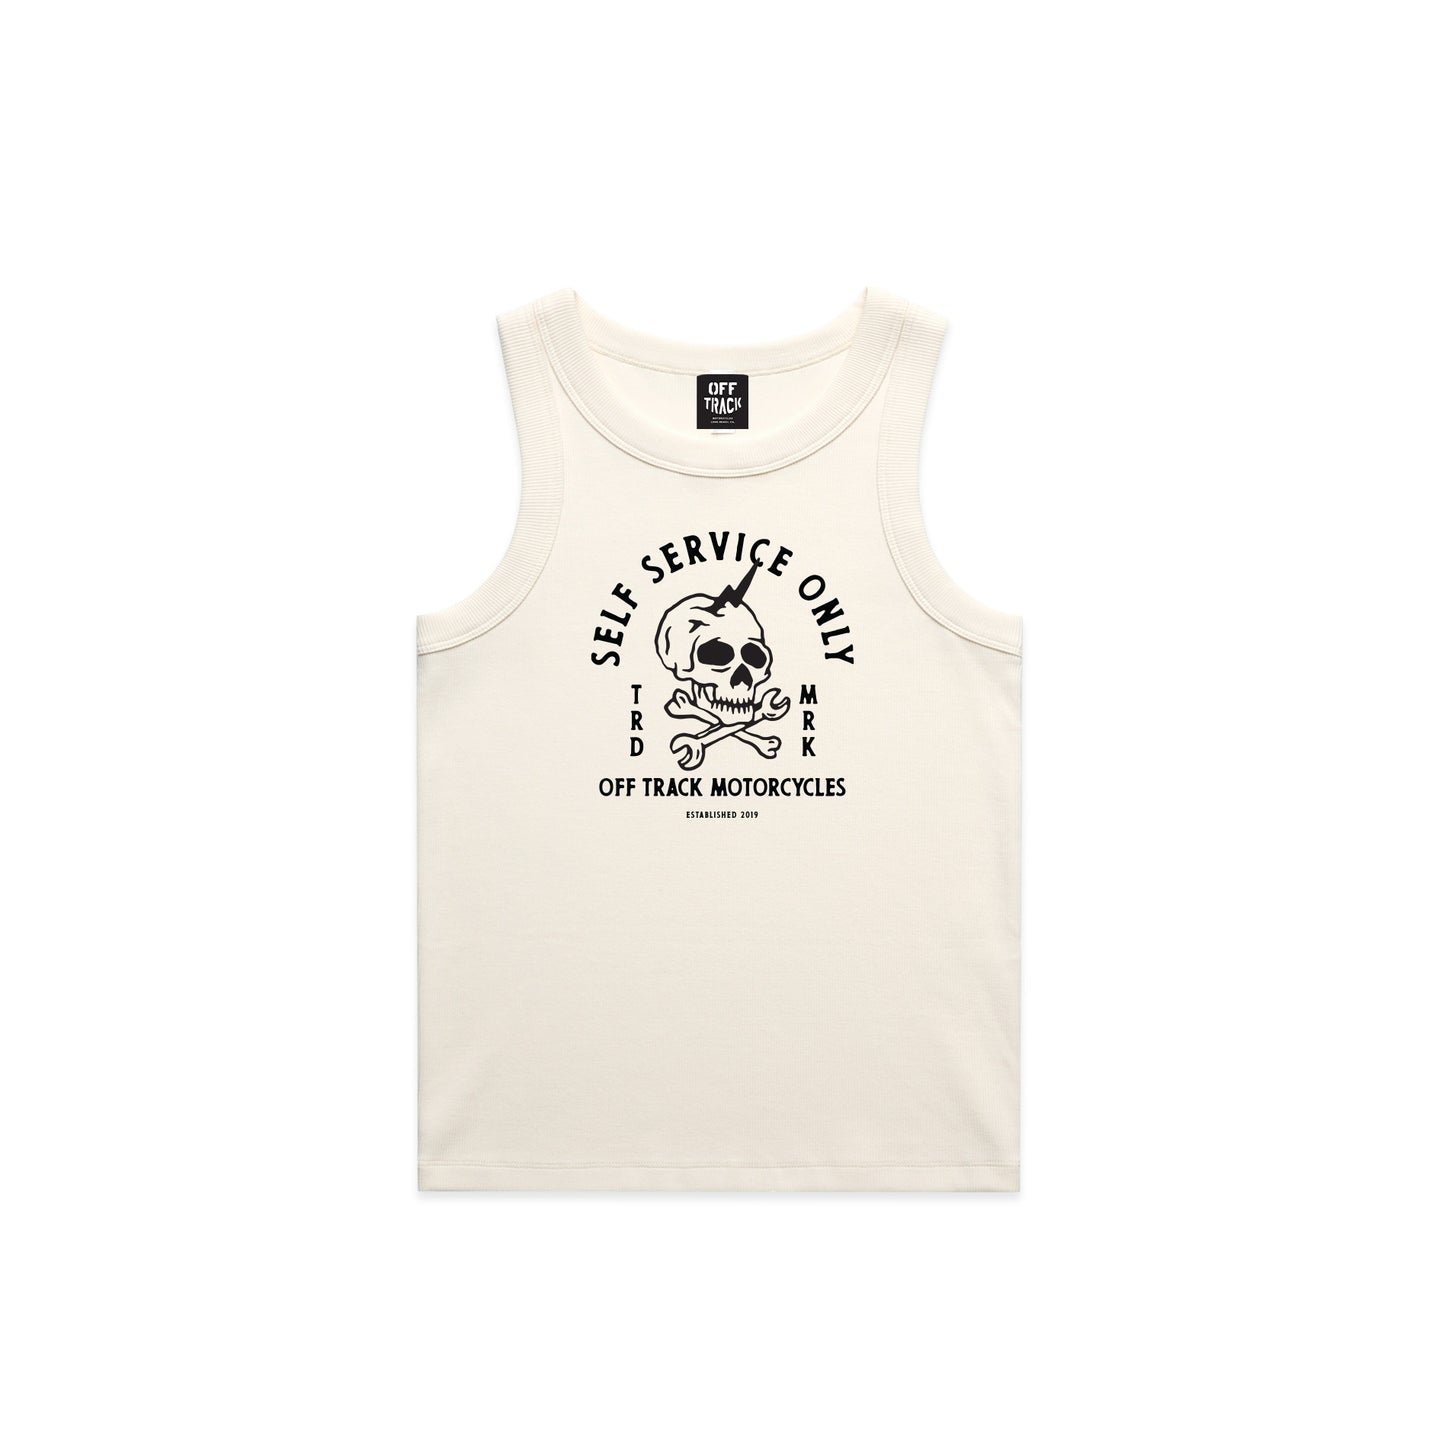 OFF TRACK SELF SERVICE WOMENS RIBBED TANK - VARIOUS COLORS